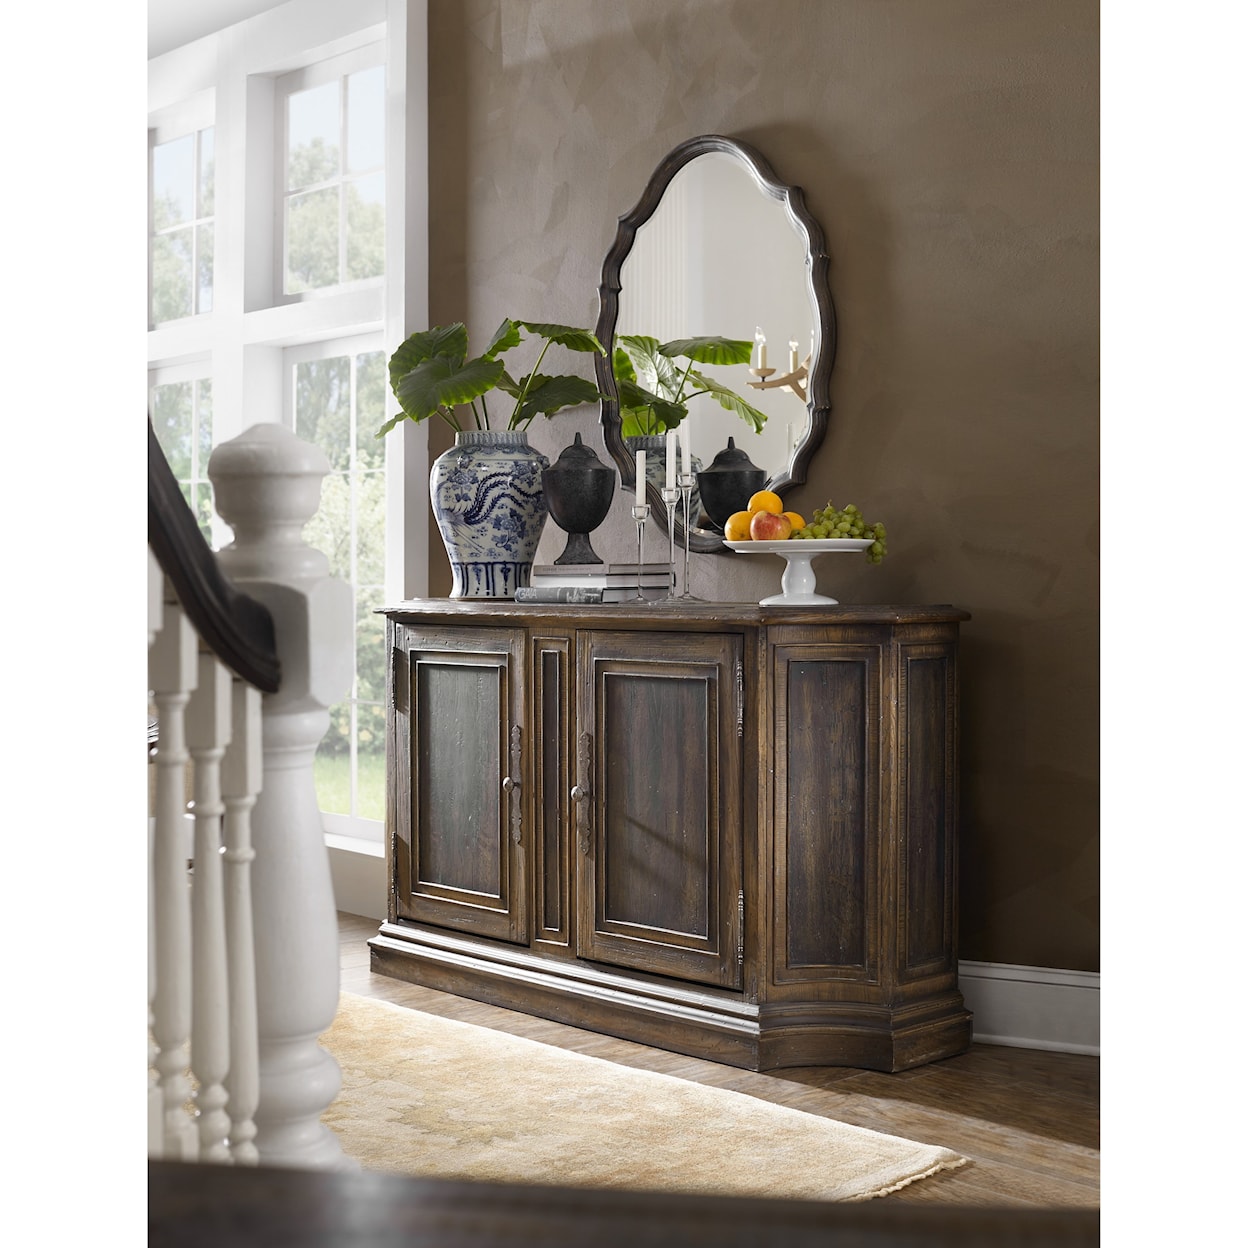 Hooker Furniture Hill Country North Cliff Sideboard